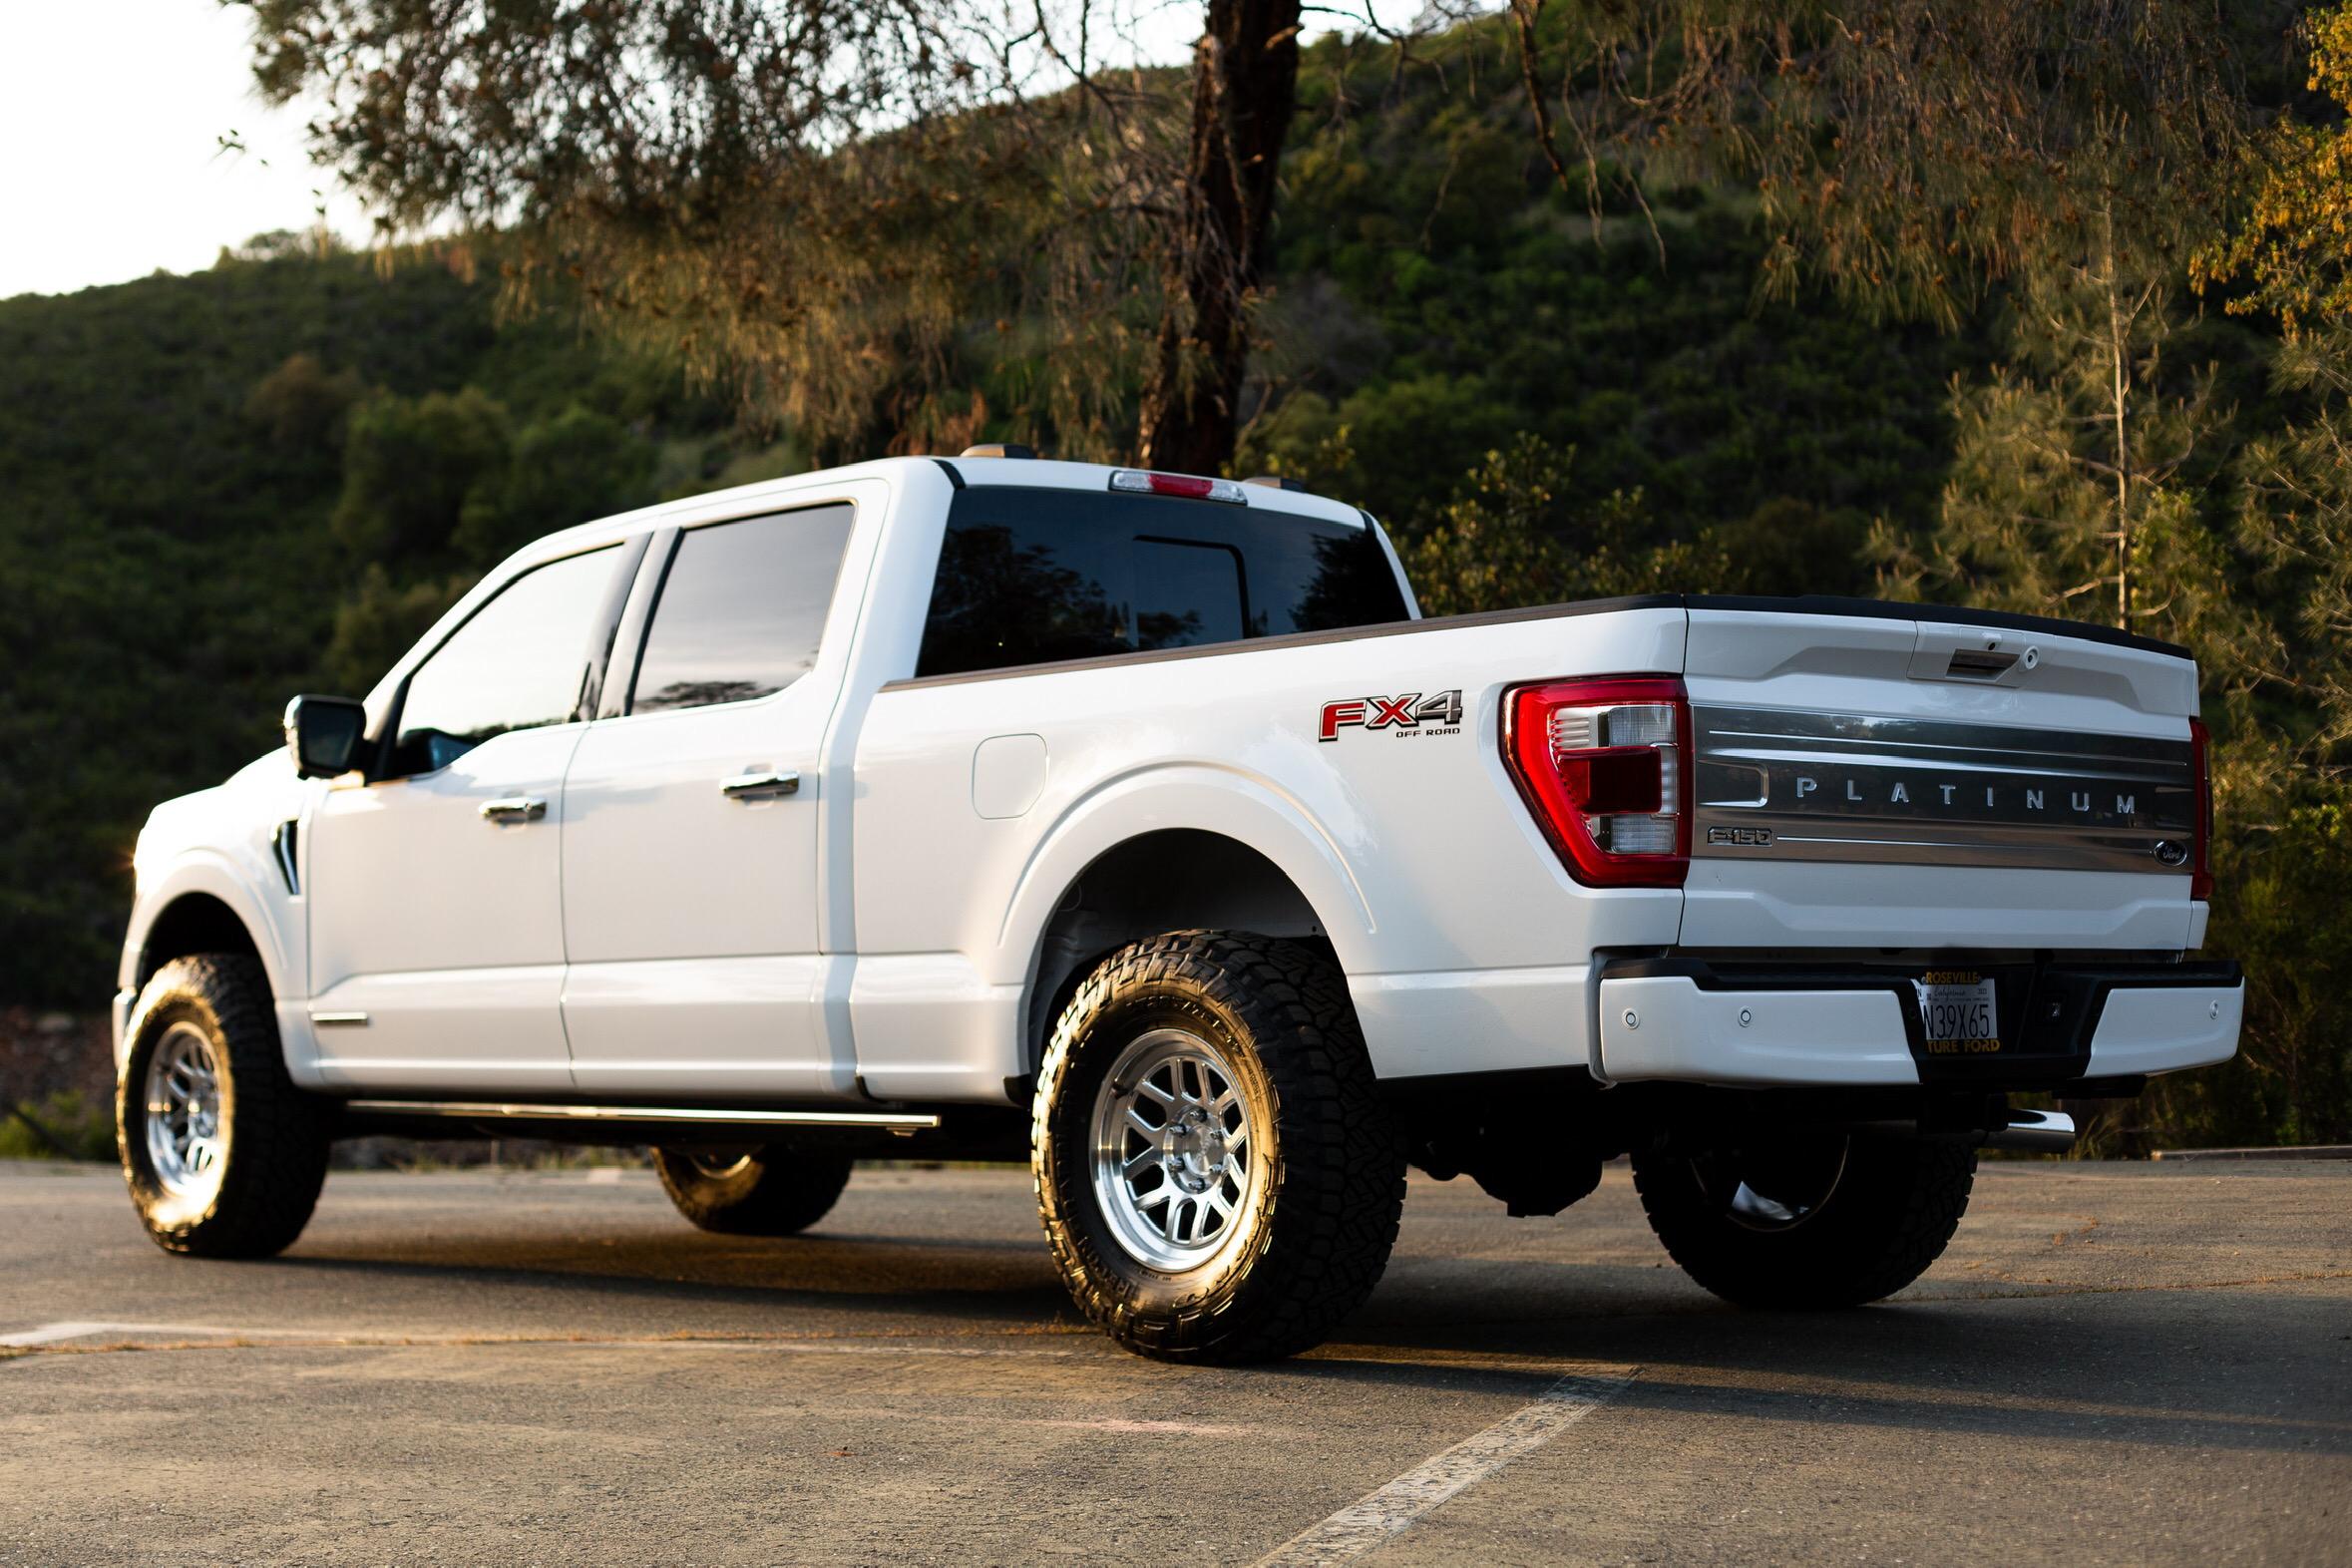 Ford F-150 ‘23 Platinum PowerBoost F-150 with: KMC446 wheels, Nitto Recon Grapplers. Ford Performance (Bilstein) Leveling Kit 82C40B9B-EEF3-4348-A179-A87BDAD8A738